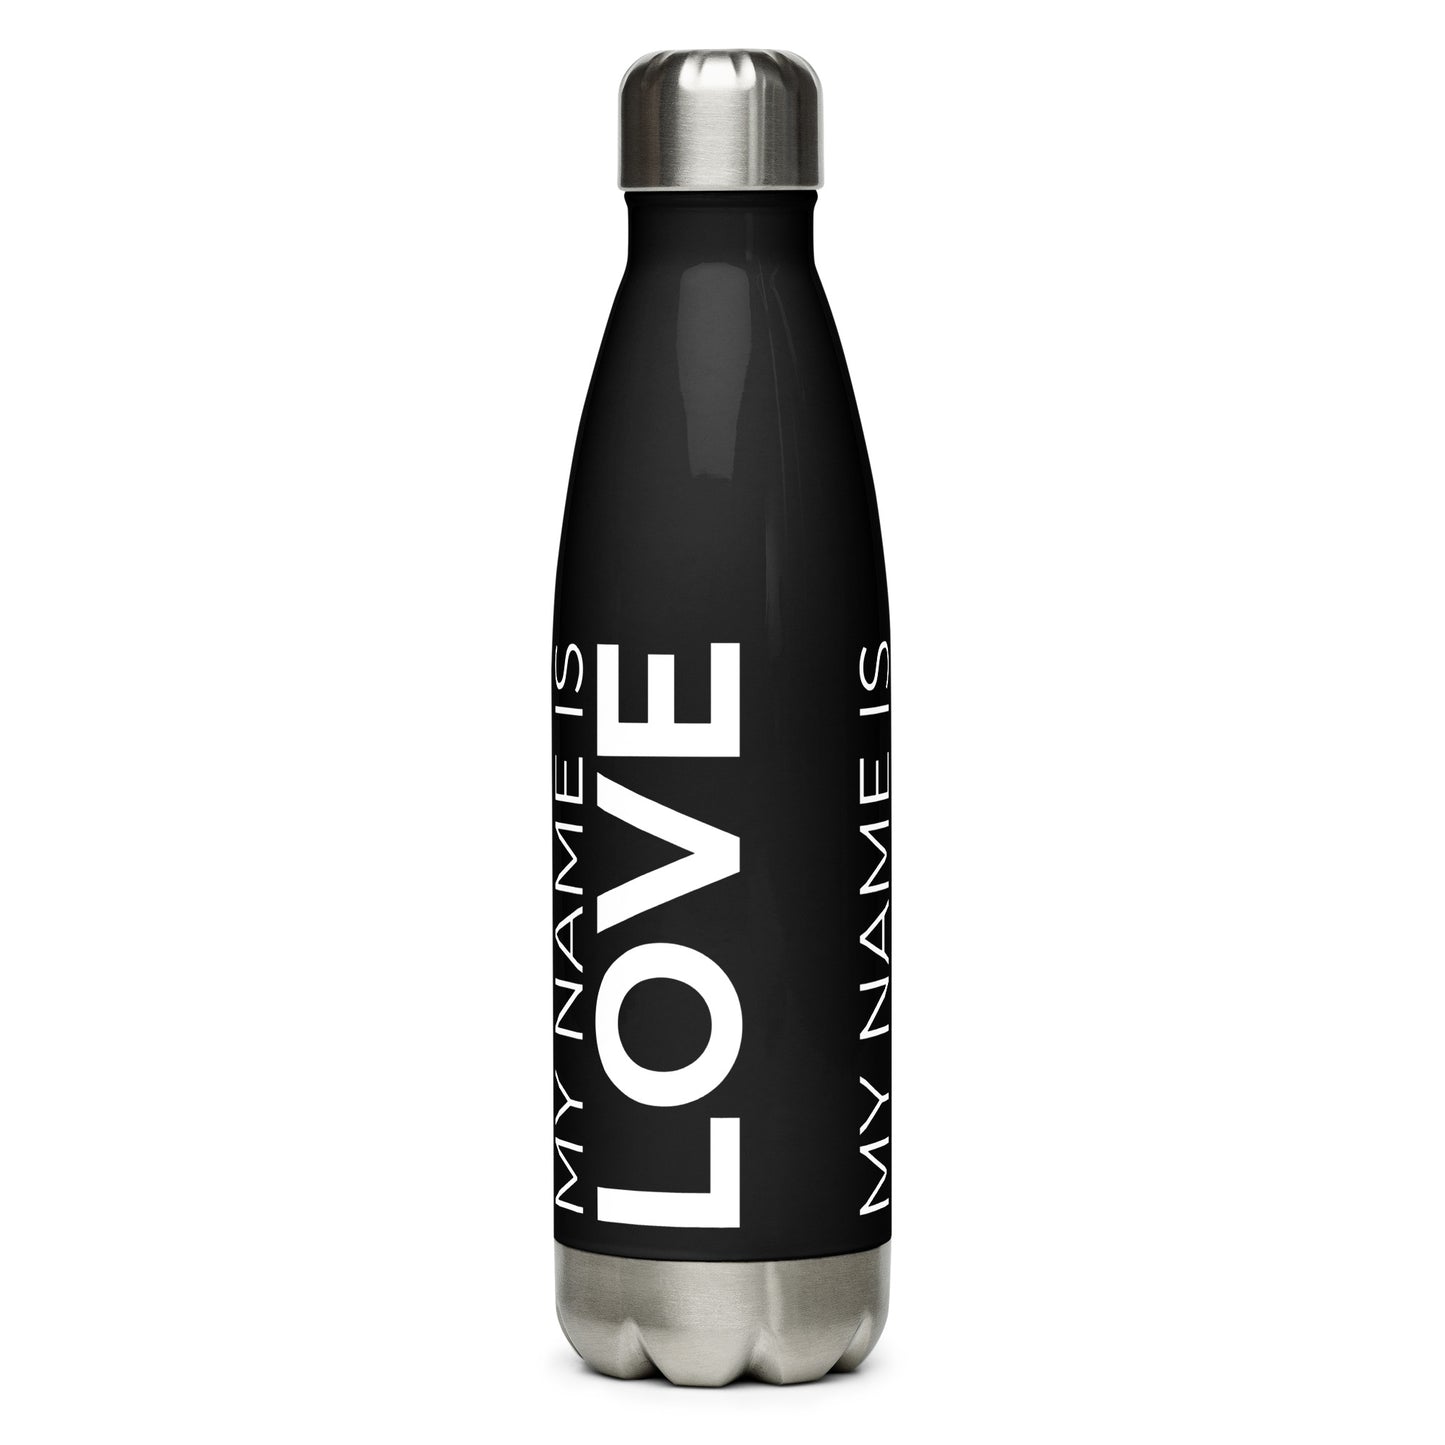 My Name Is love Stainless steel water bottle